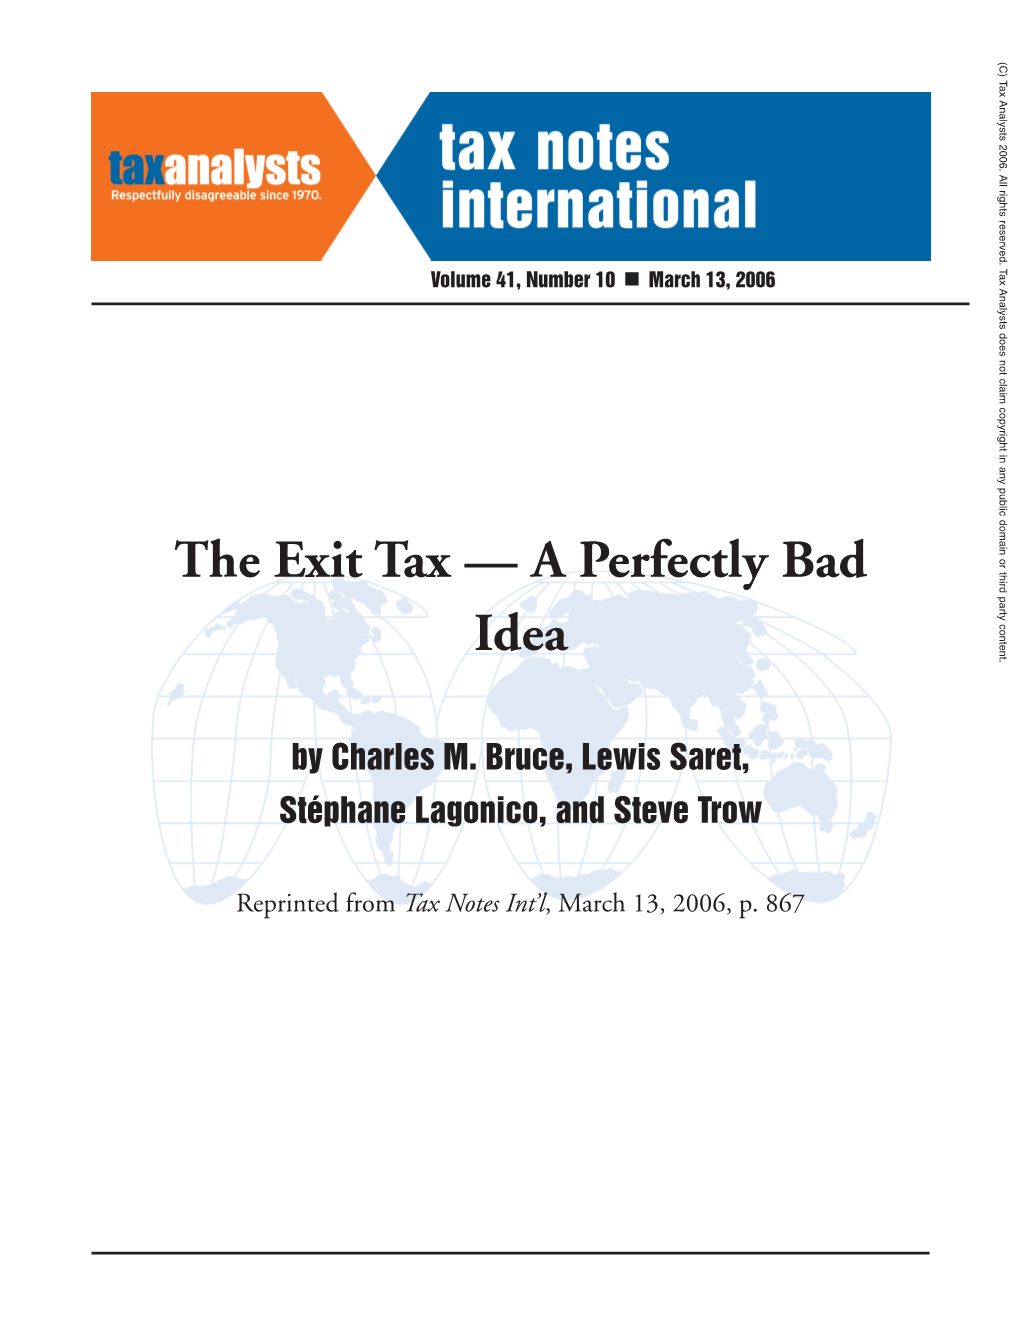 The Exit Tax — a Perfectly Bad Idea